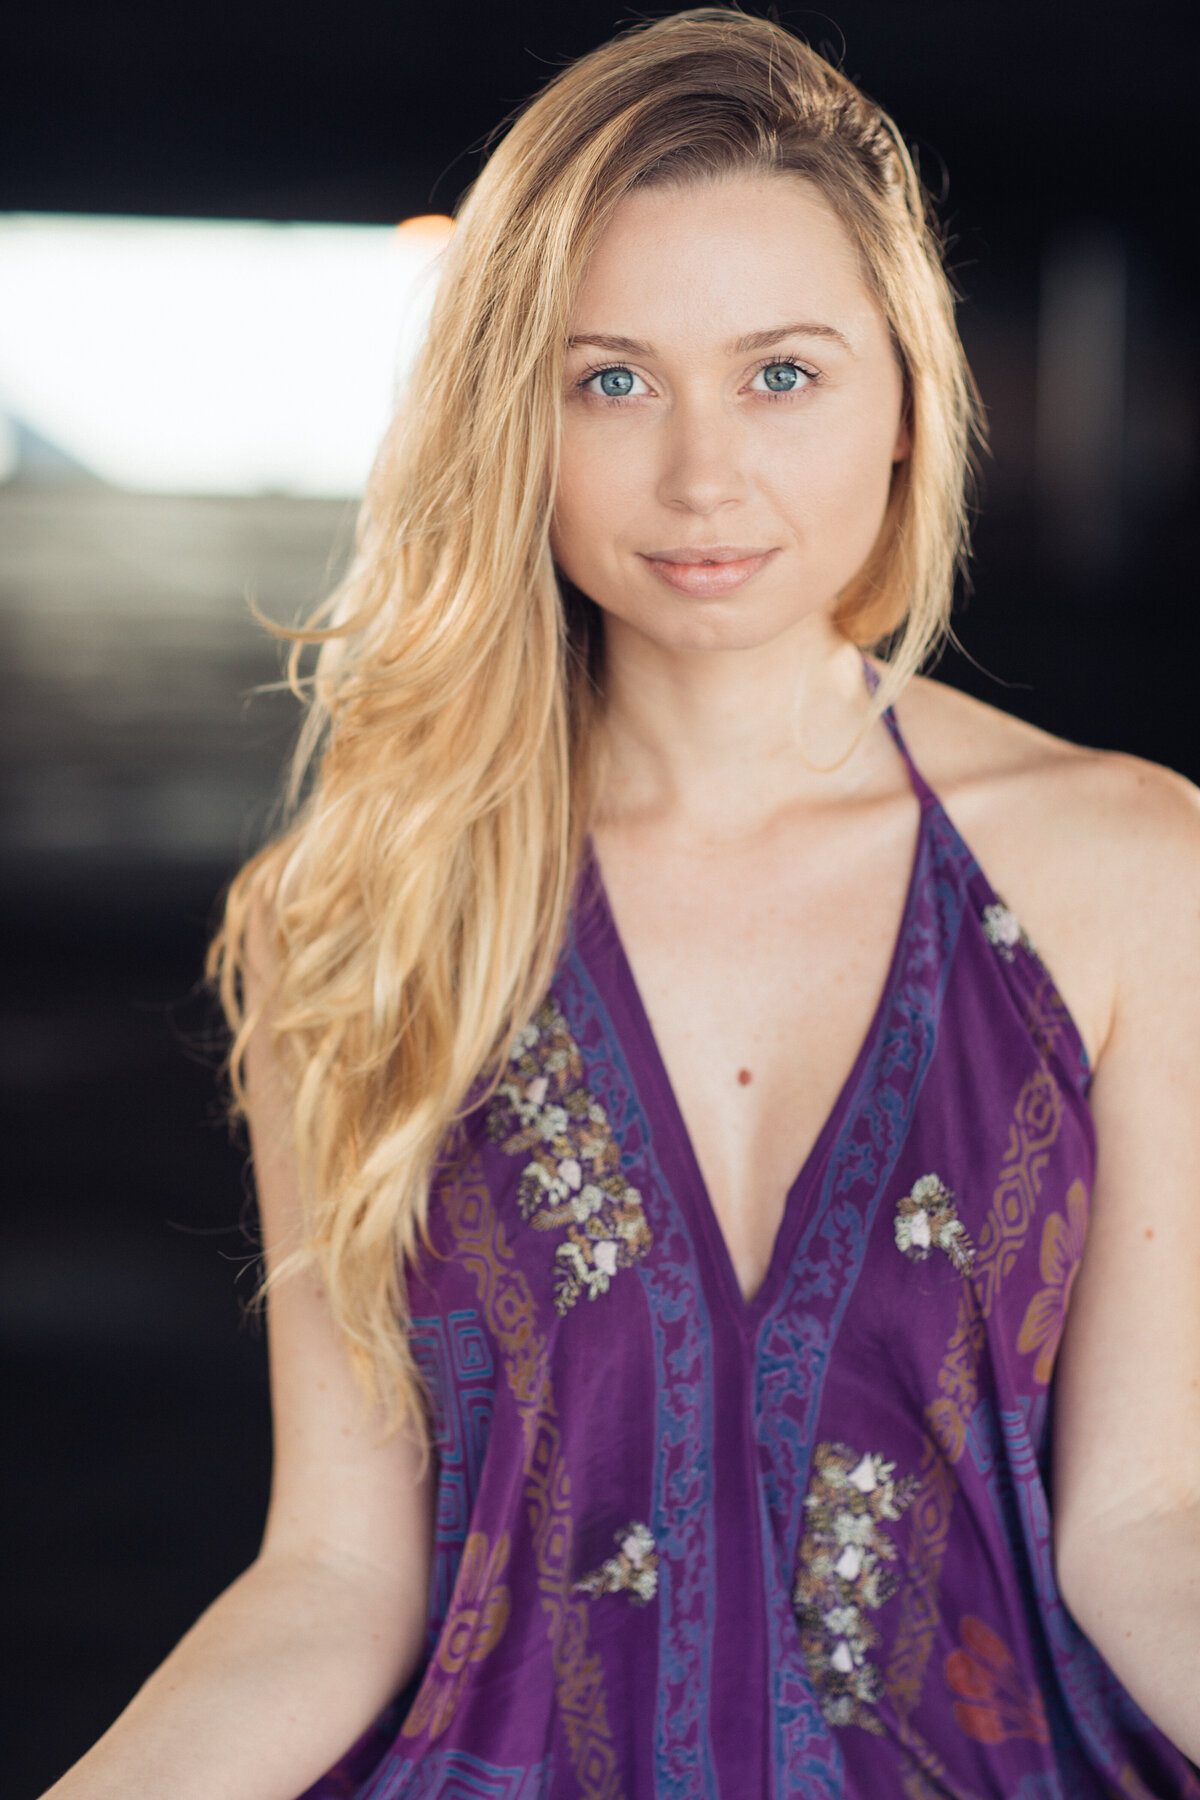 Headshot Photograph Of Young Woman In Violet Sleeveless Los Angeles